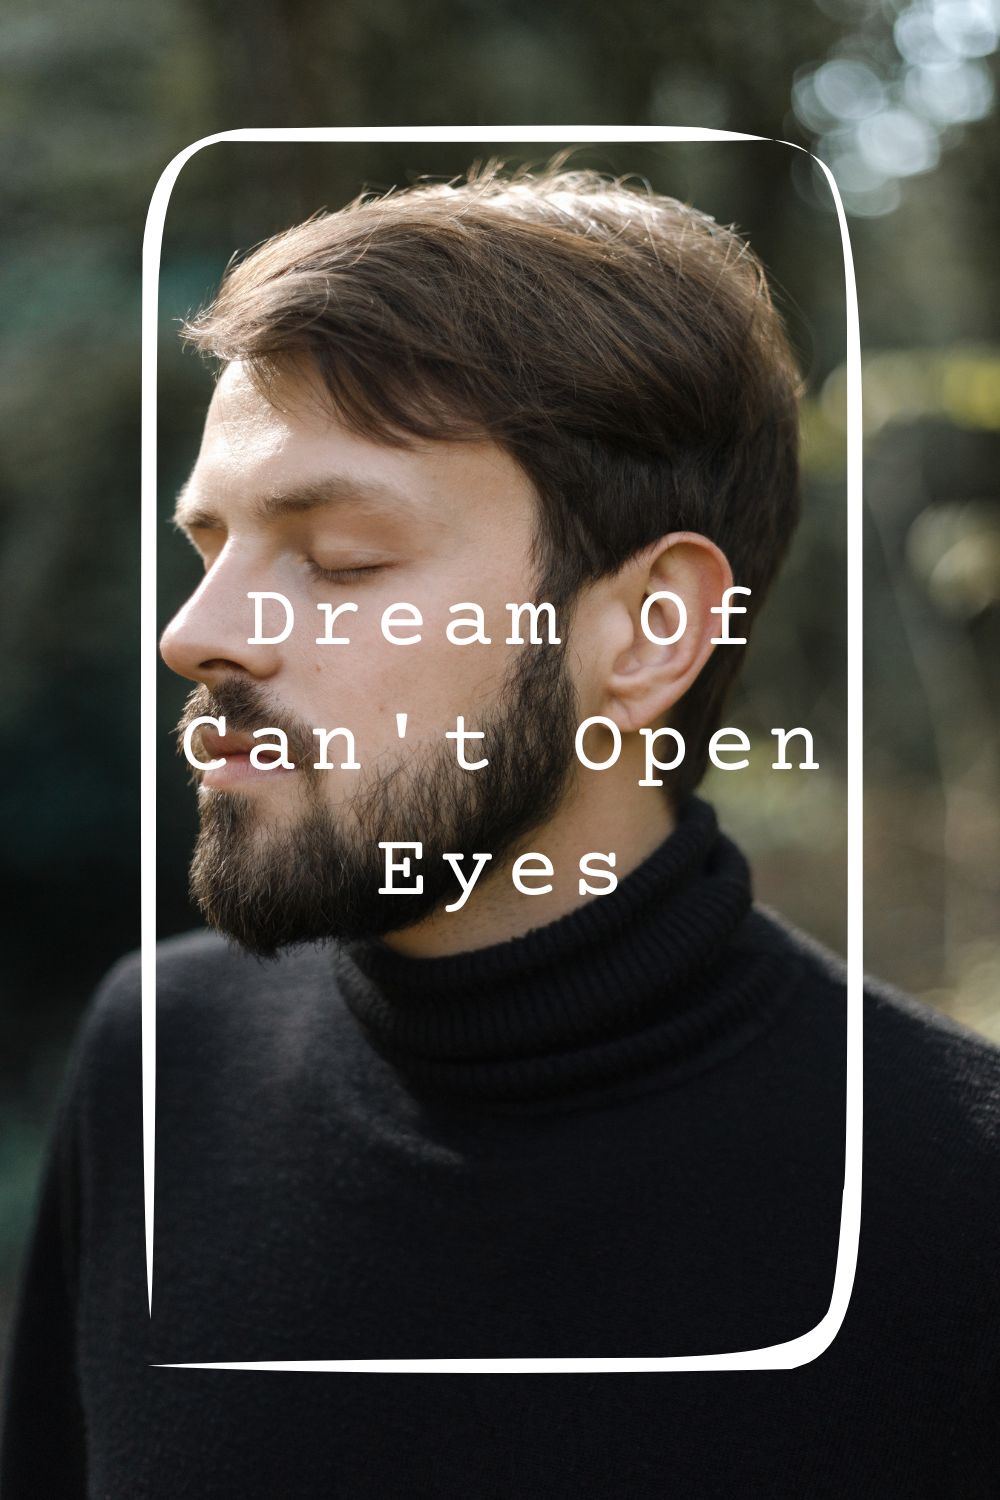 Dream Of Can't Open Eyes Meanings 2